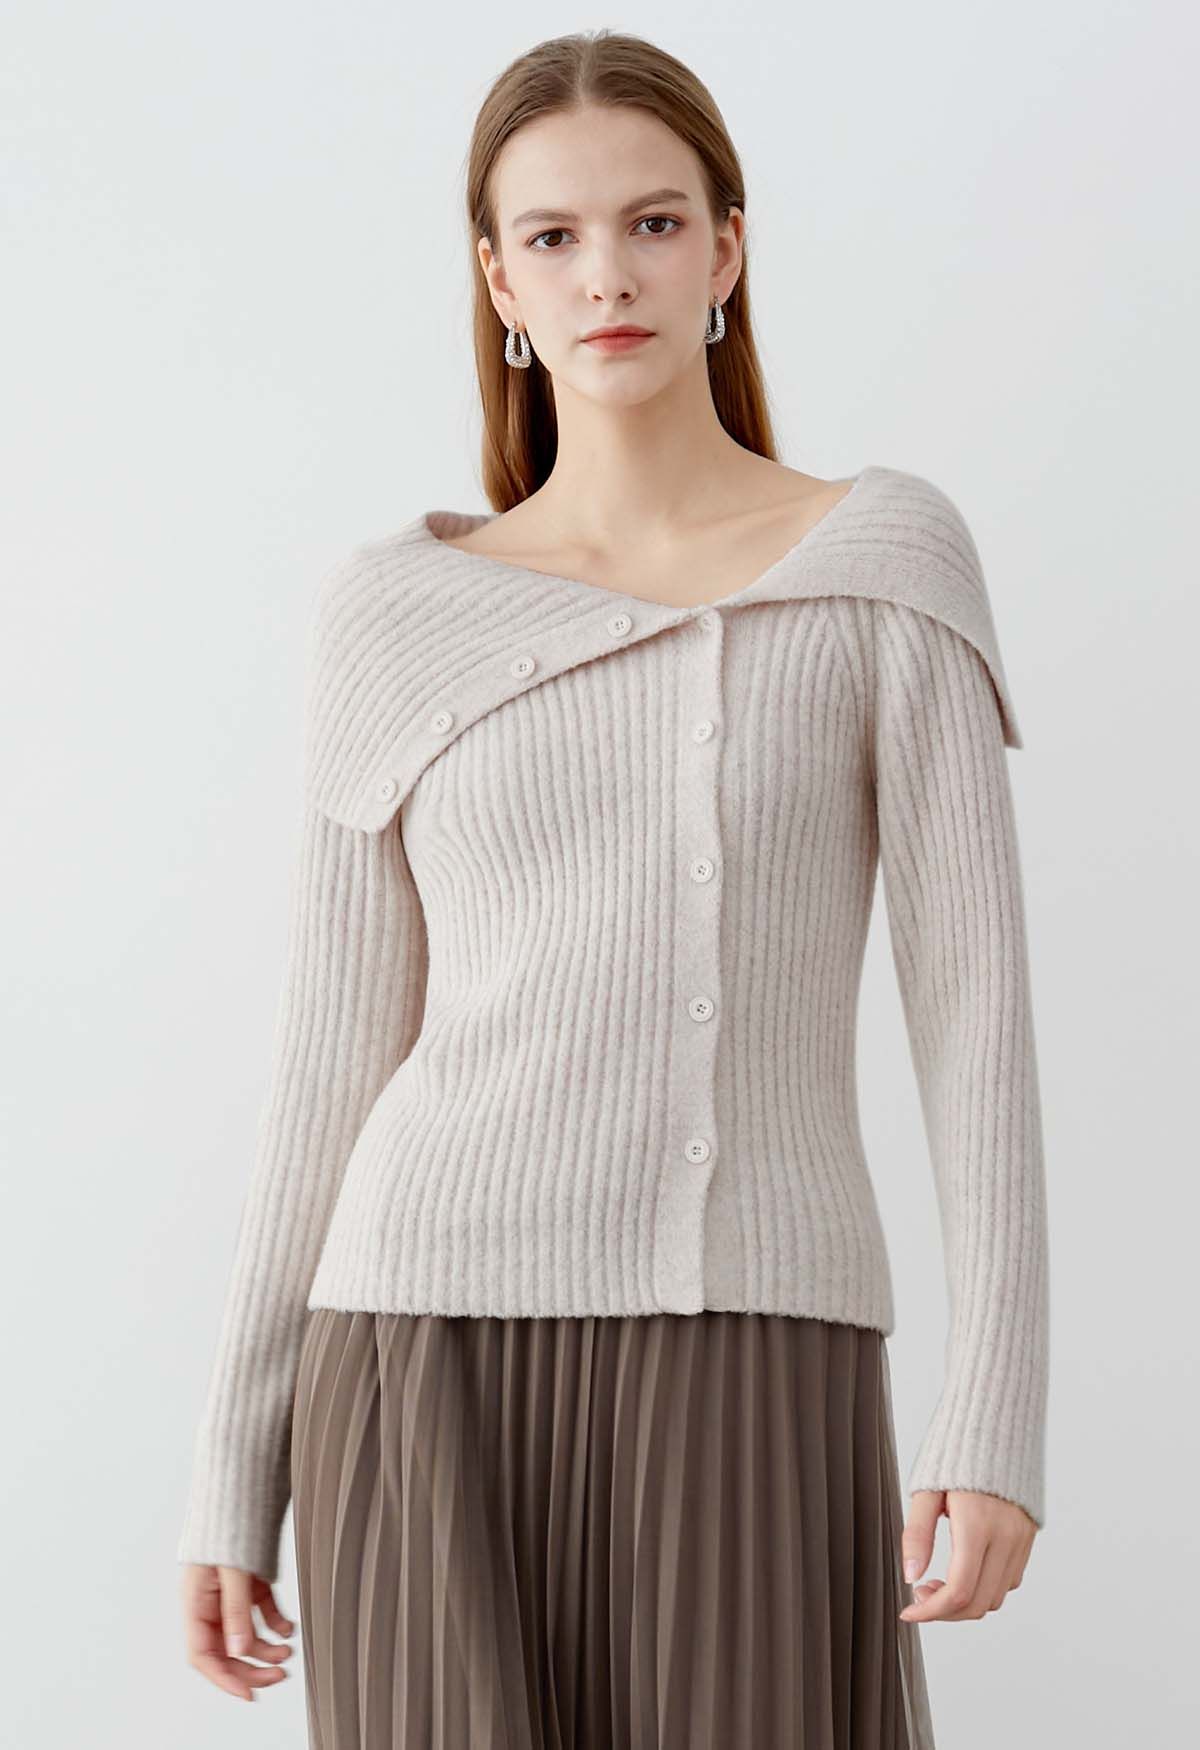 Flap Collar Side Button Down Ribbed Knit Top in Cream